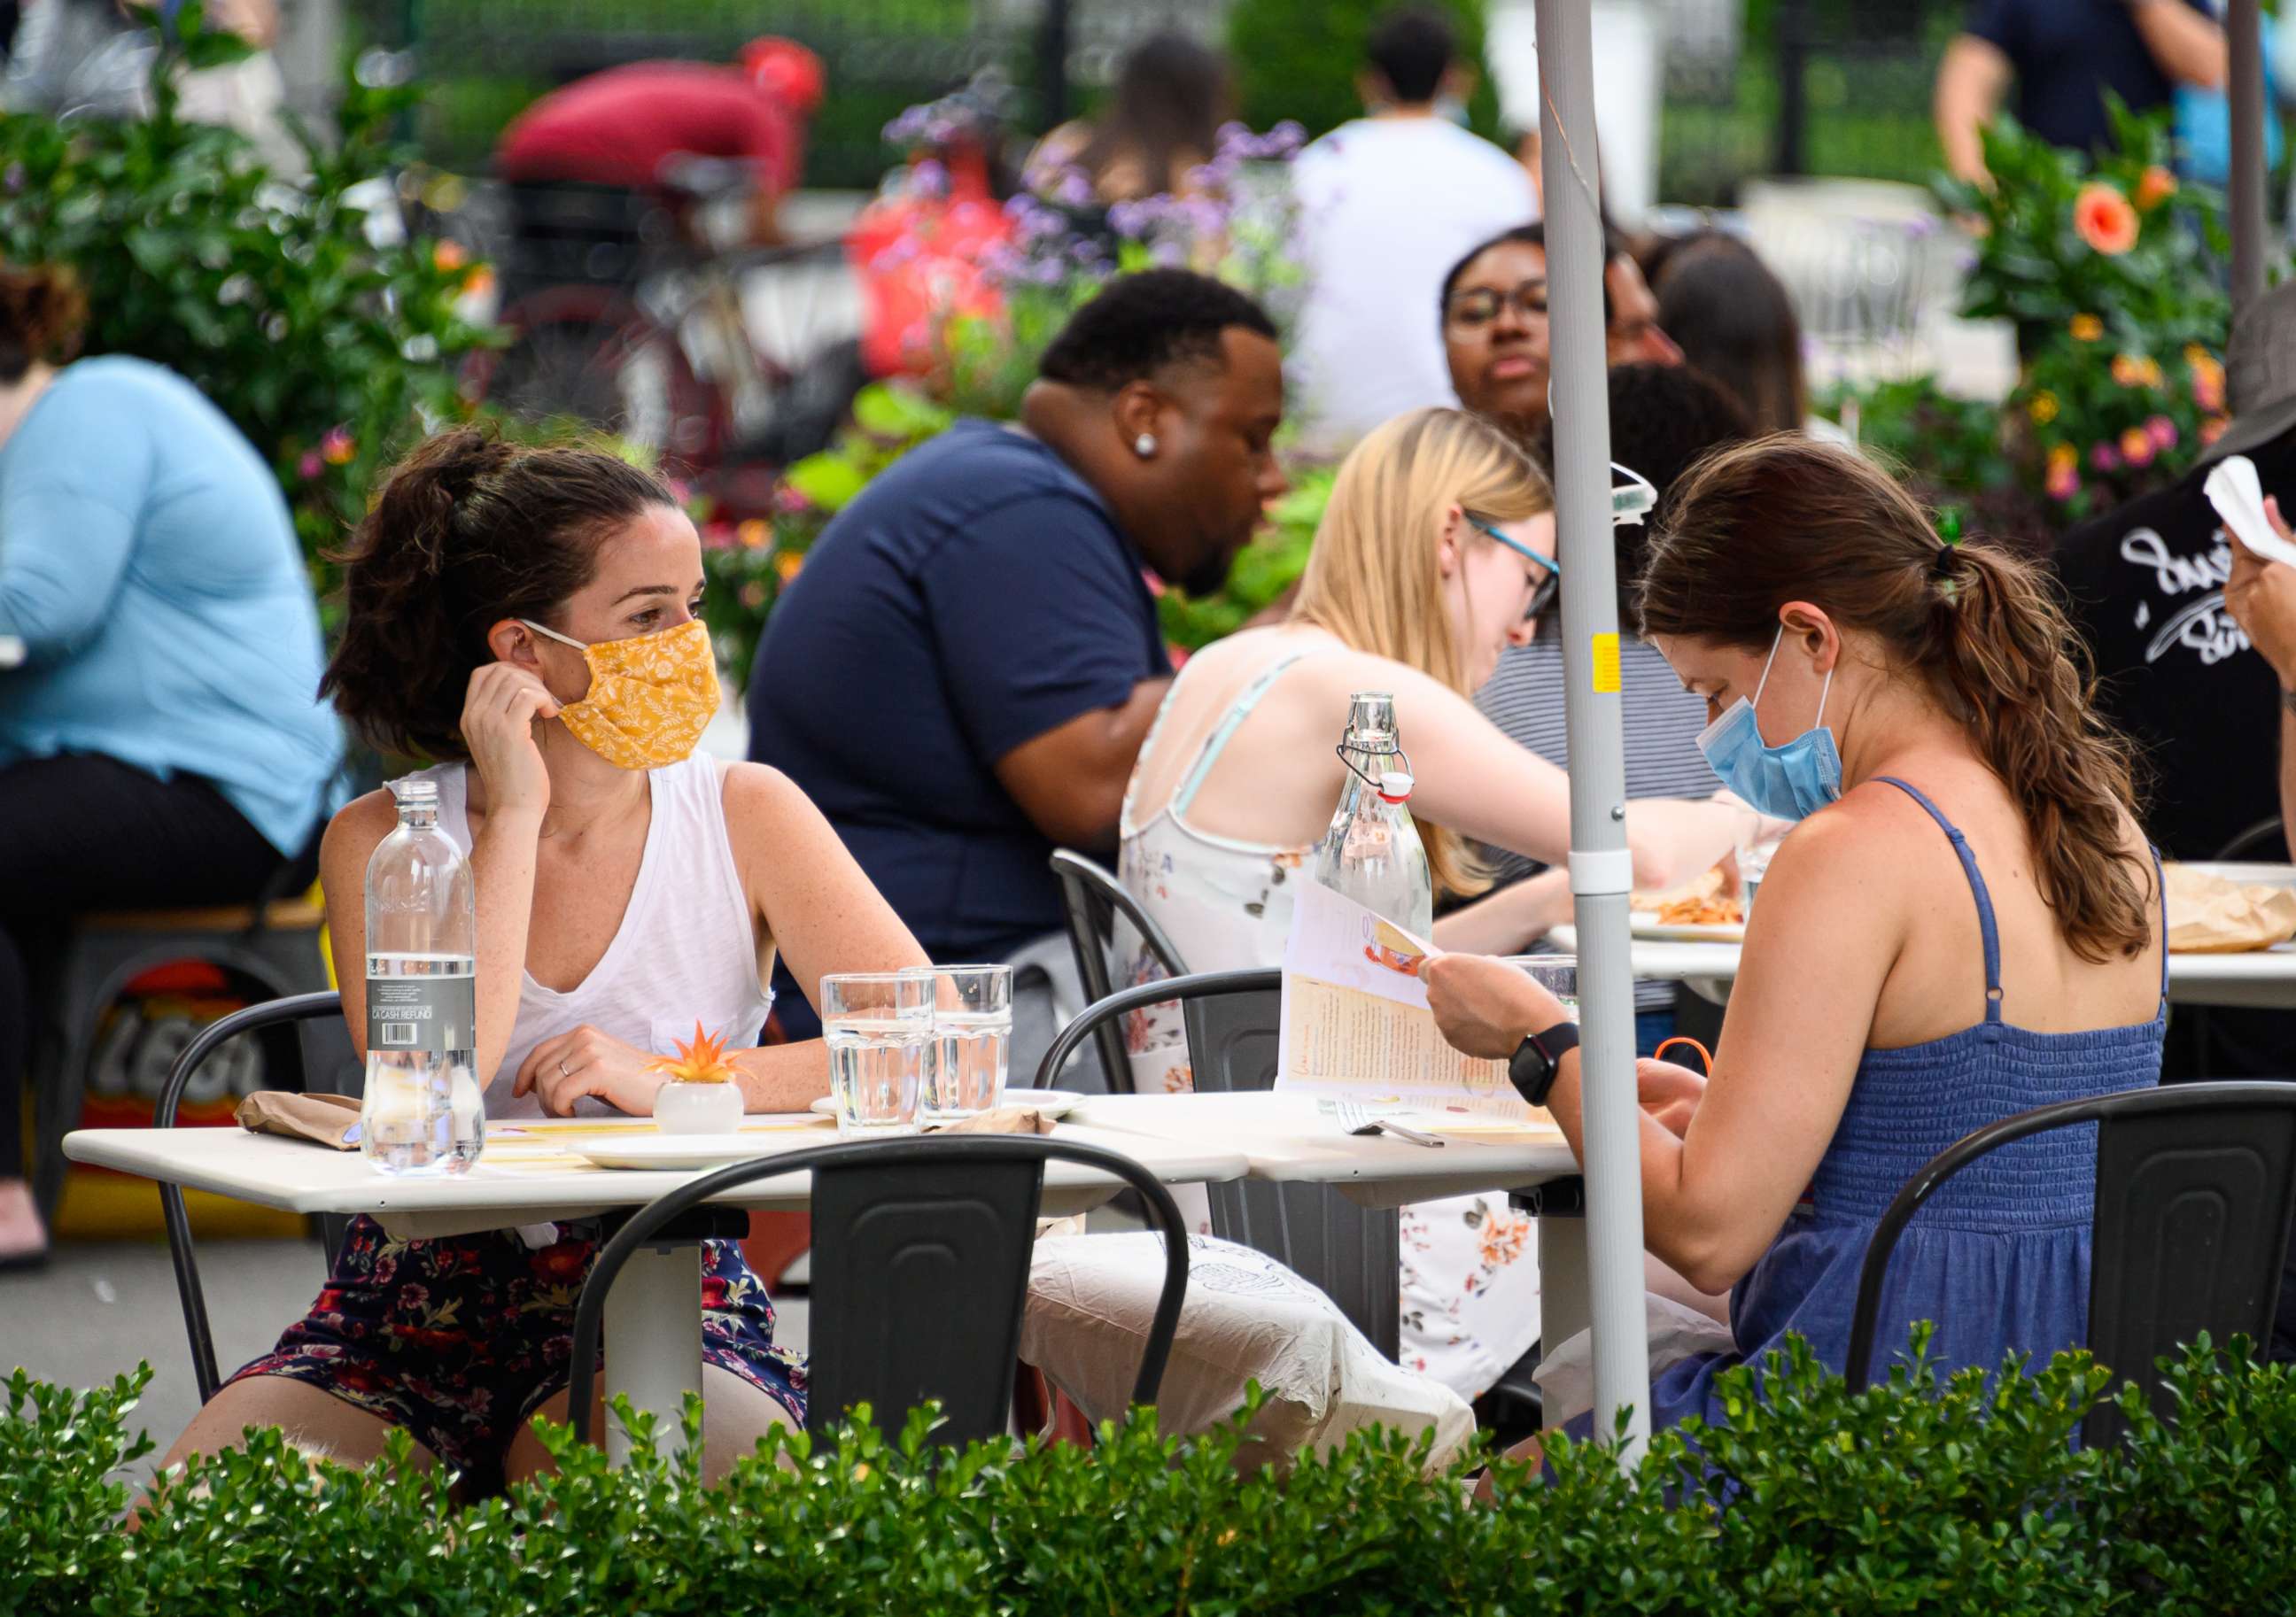 PHOTO: People wear protective face masks at an outdoor restaurant in the Flatiron District as the city continues Phase 4 of re-opening following restrictions imposed to slow the spread of coronavirus on July 26, 2020 in New York City.